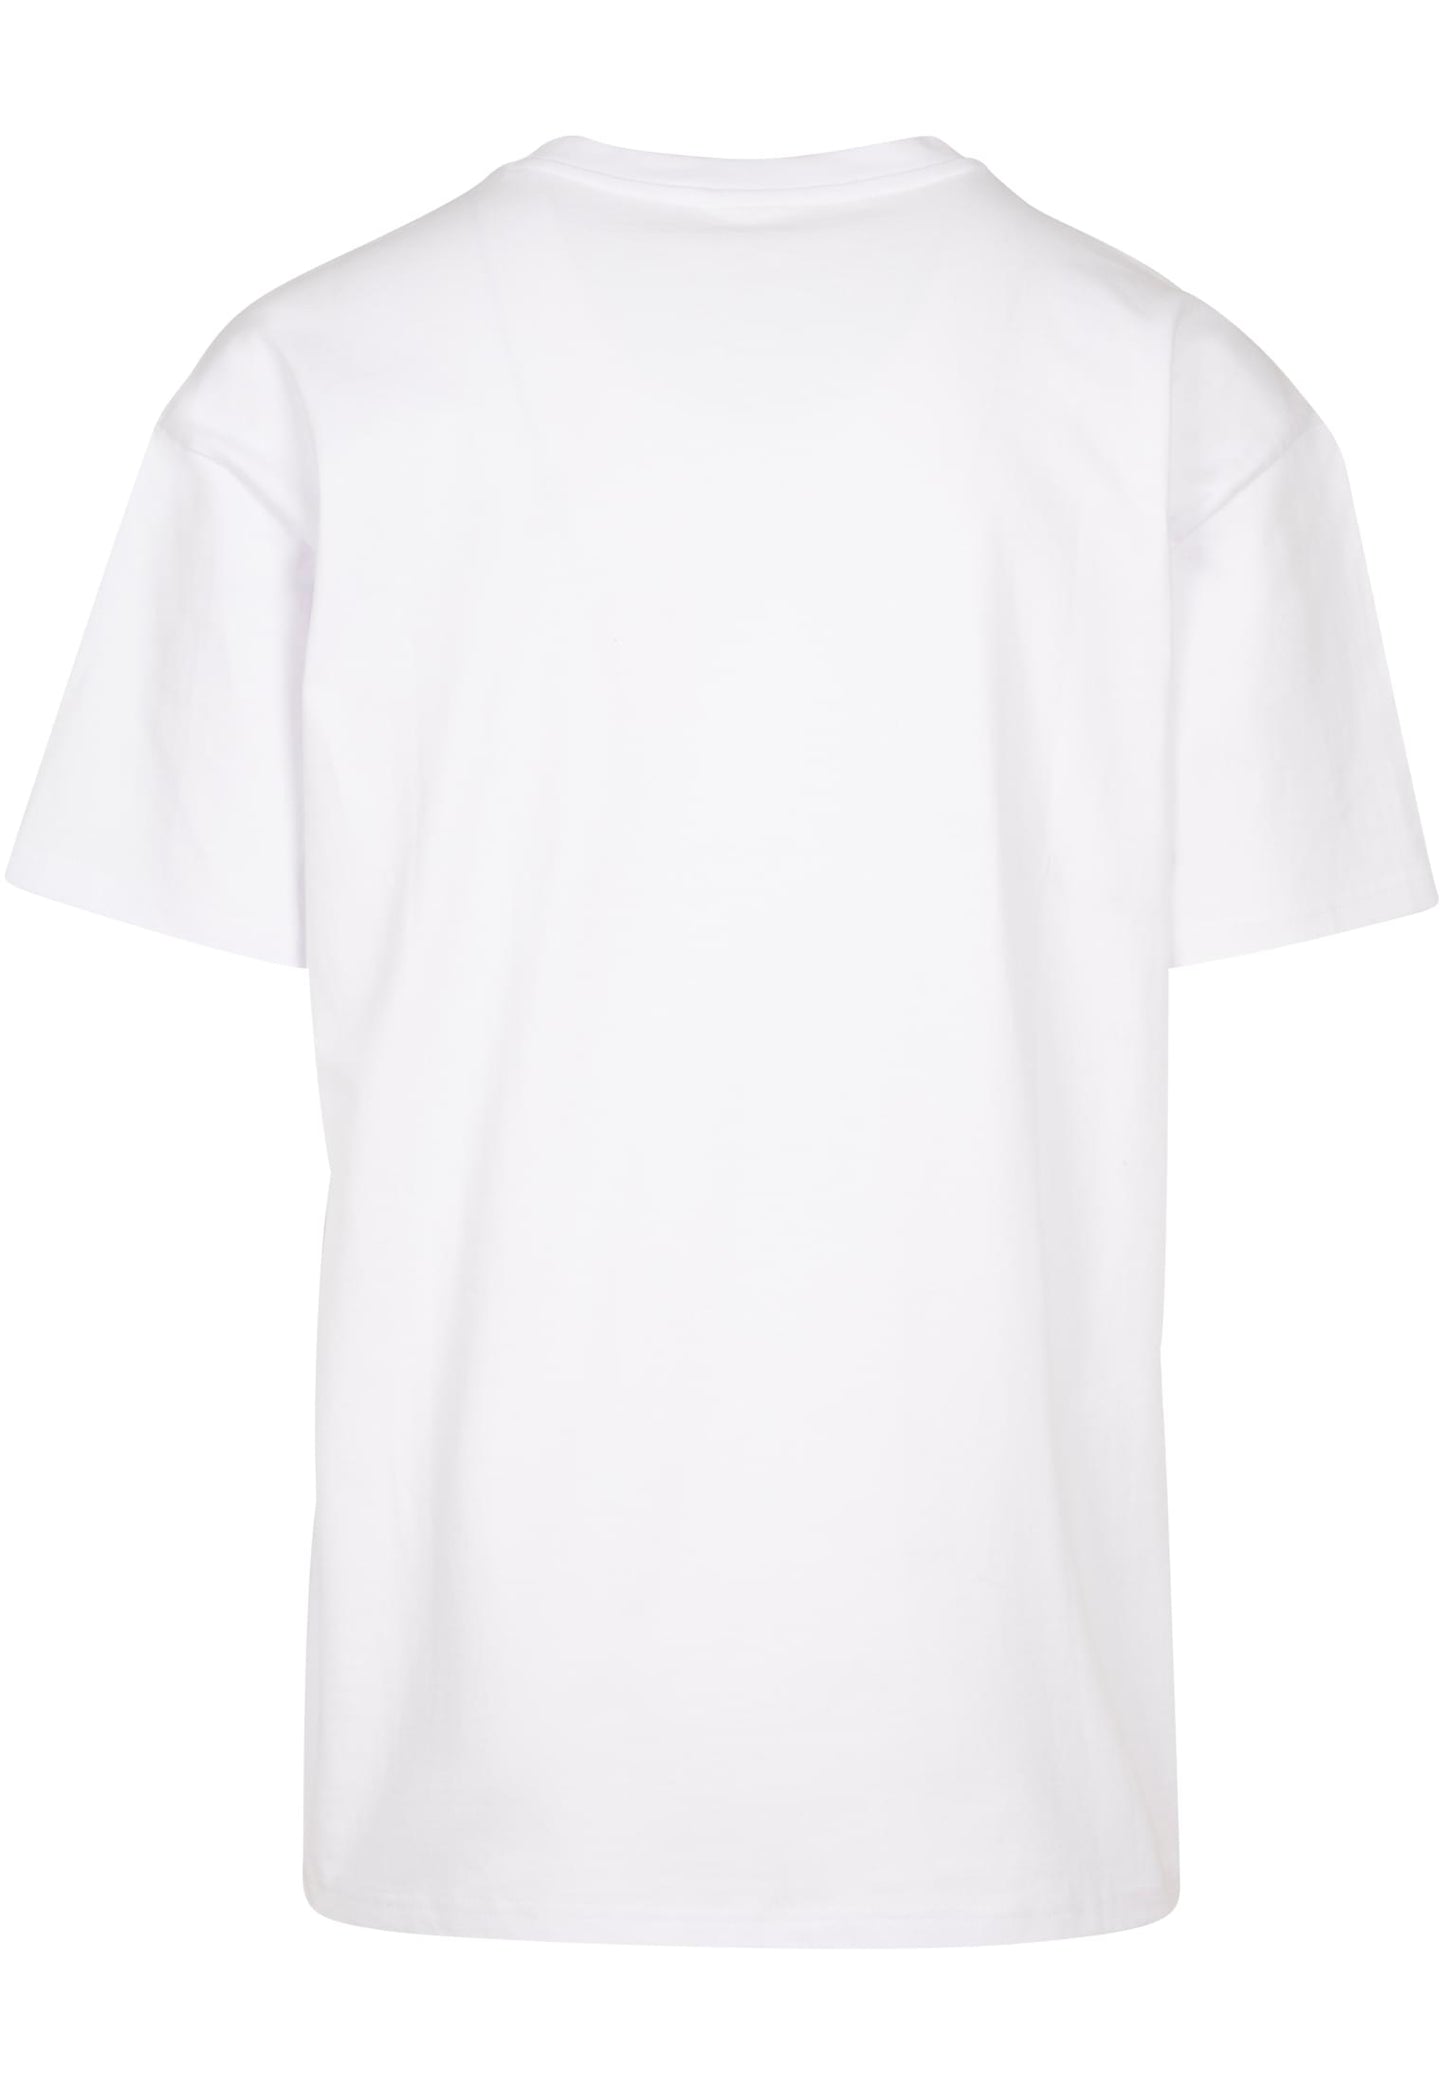 Upscale Studios Days Before Summer Oversize T-Shirt white im BAWRZ® One Stop Hip-Hop Shop